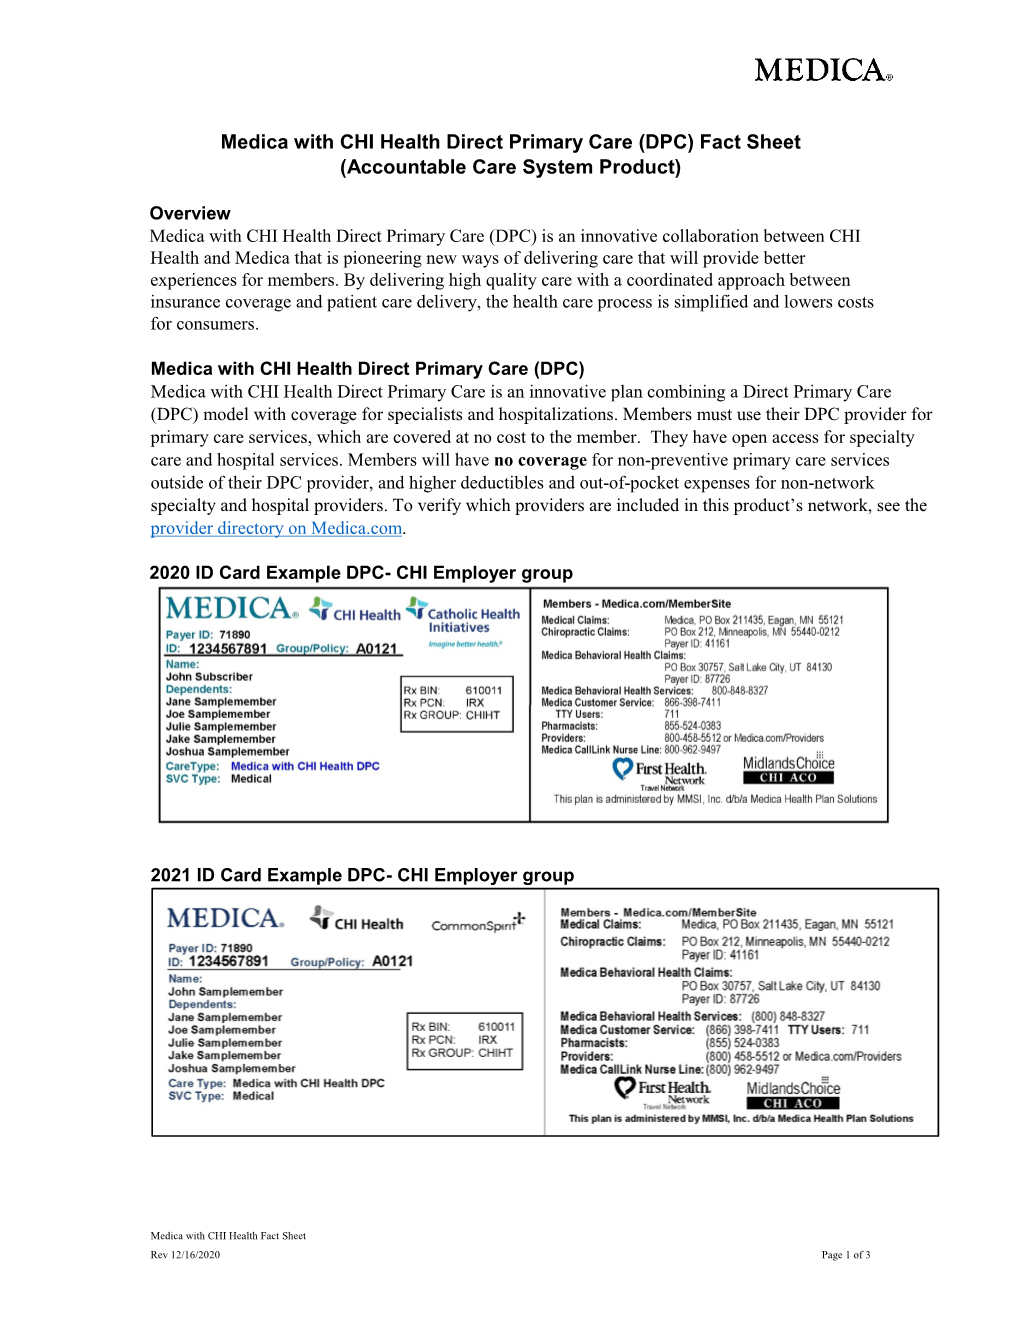 Medica with CHI Health Direct Primary Care (DPC) Fact Sheet (Accountable Care System Product)